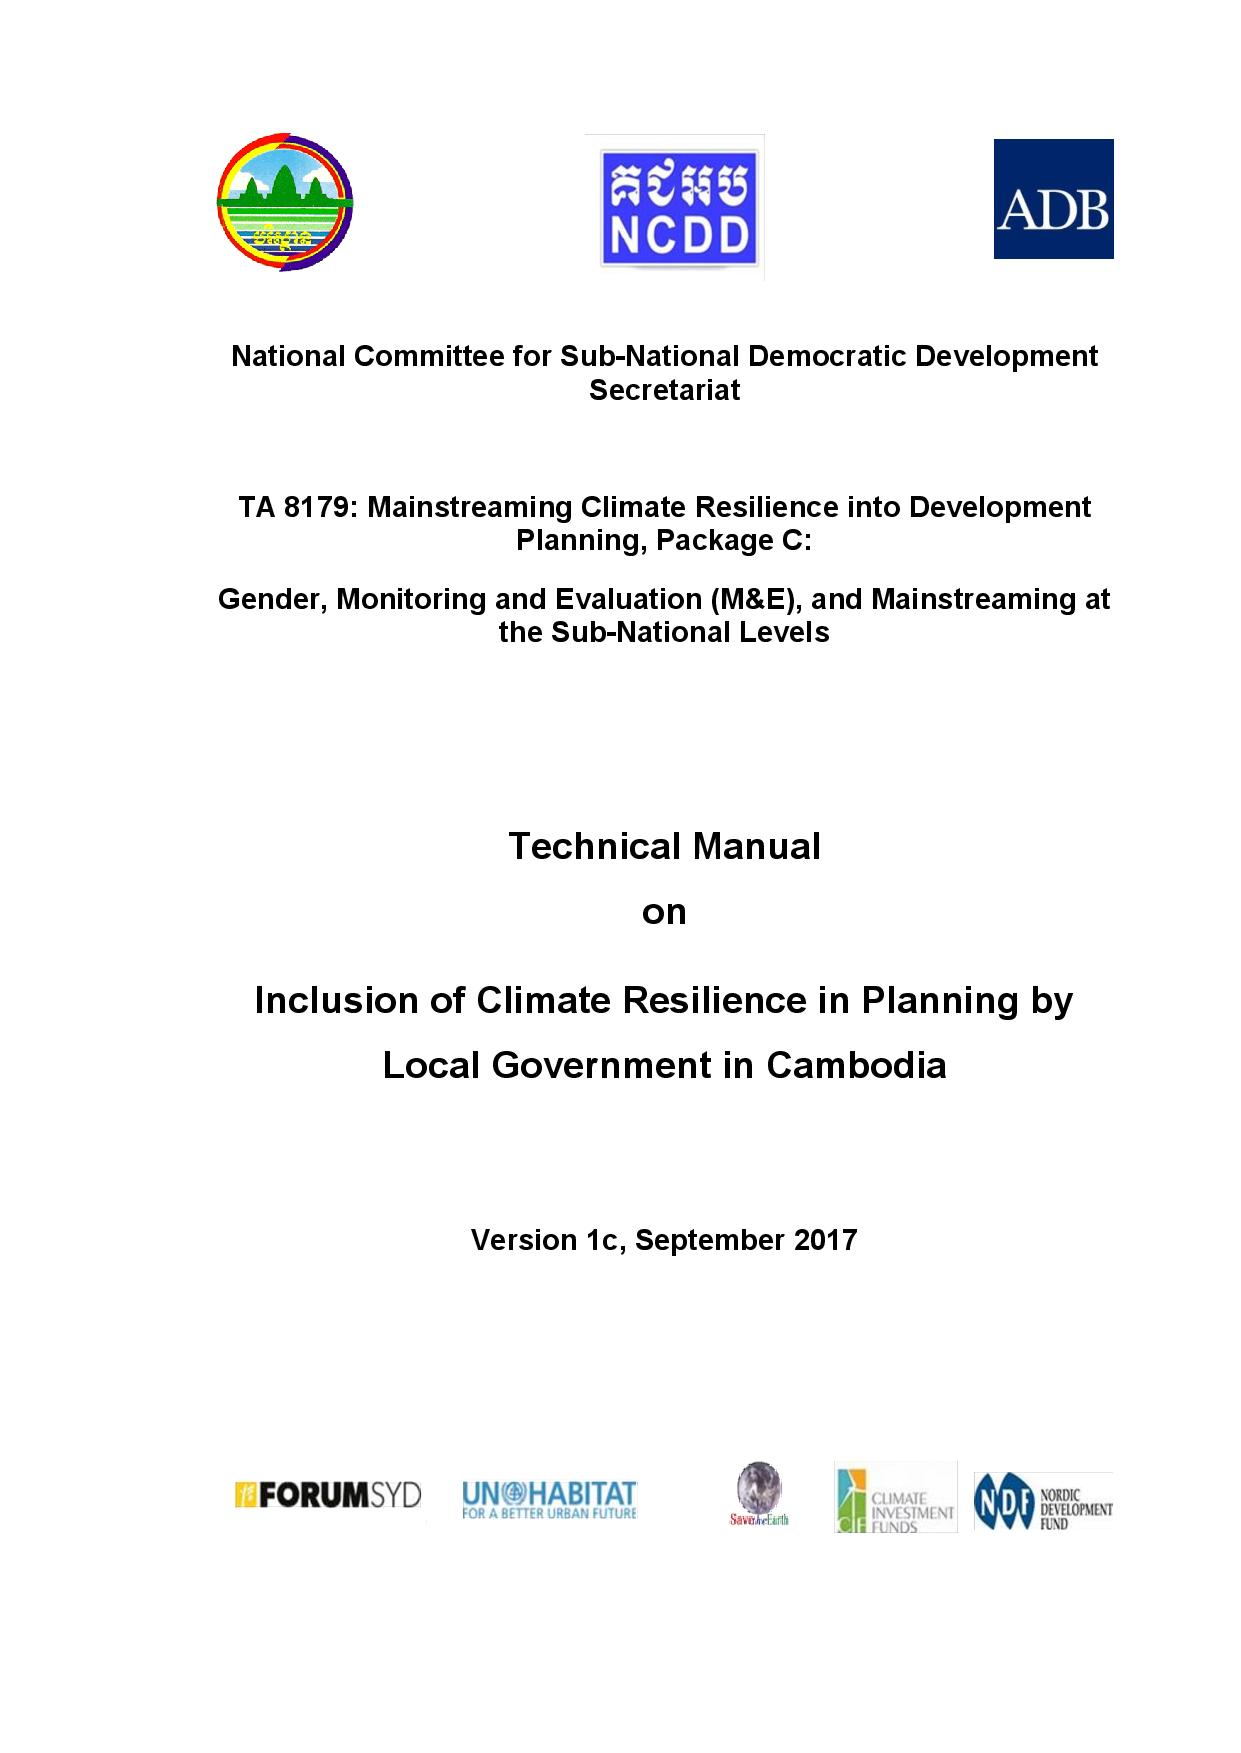 Technical Manual on Inclusion of Climate Resilience in Planning by Local Government in Cambodia